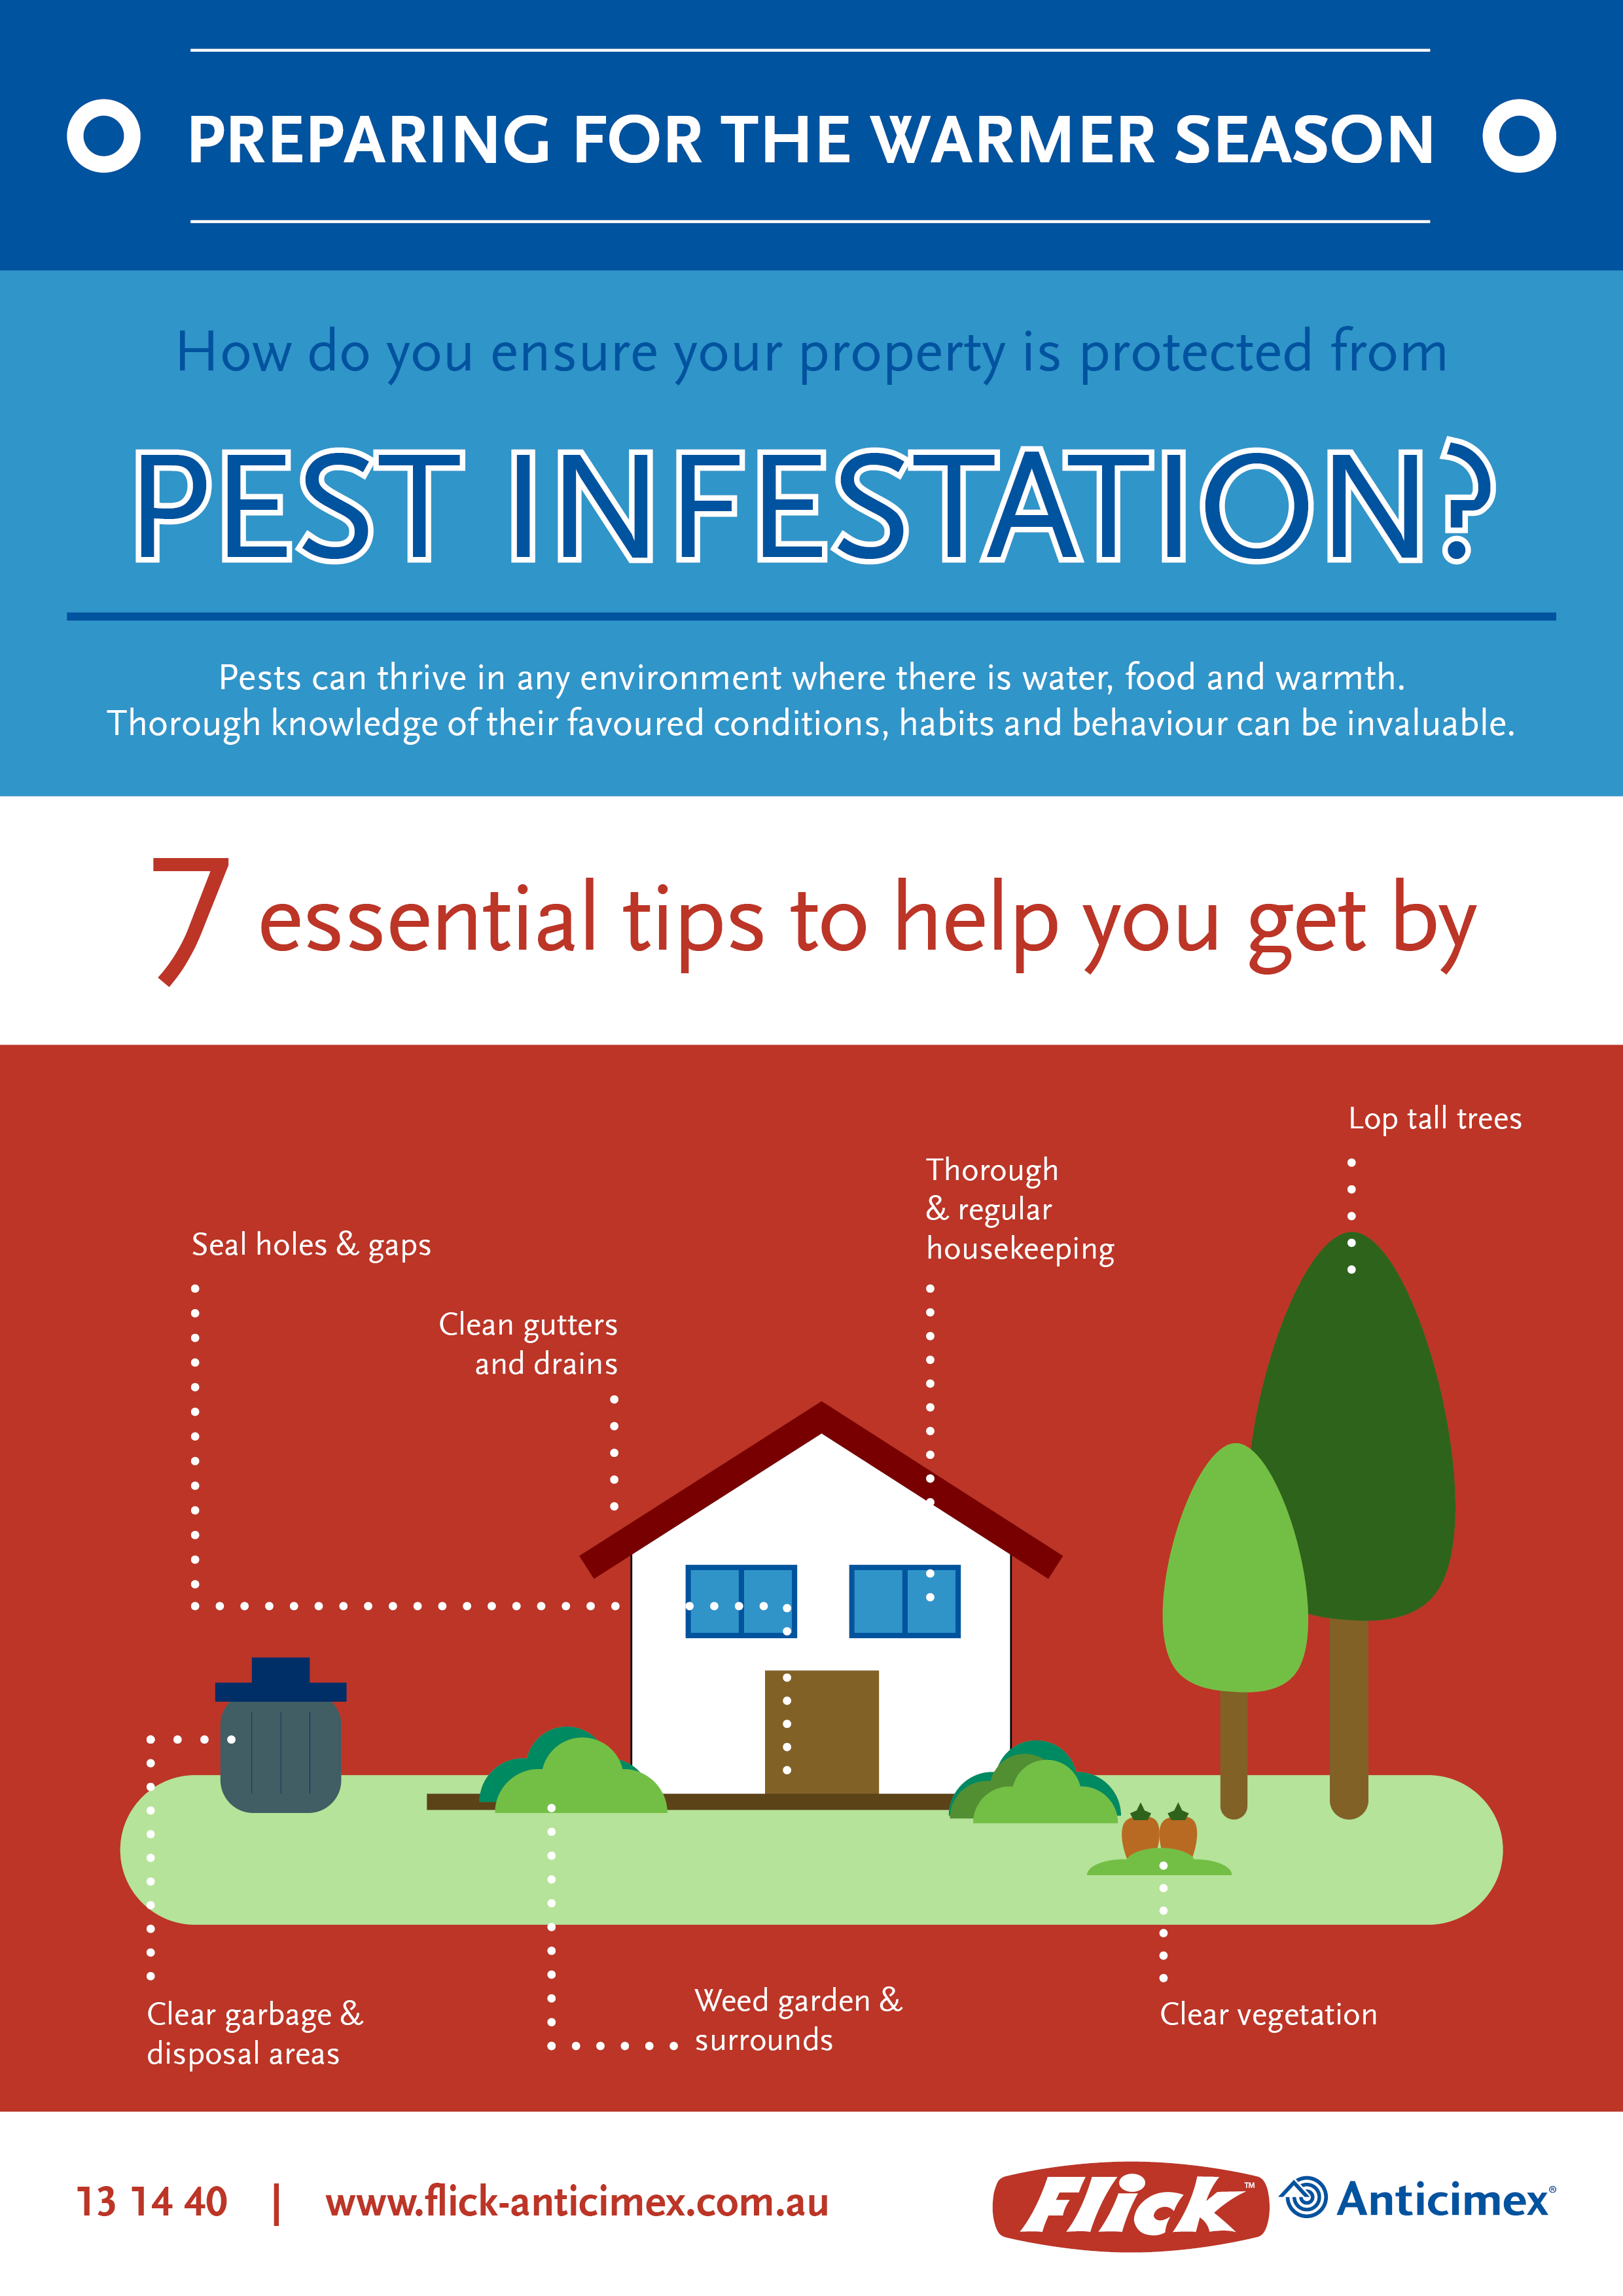 How do you ensure your property is protected from pest infestation during the warmer seasons? Here are 7 essential tips to help you get by during the summer.